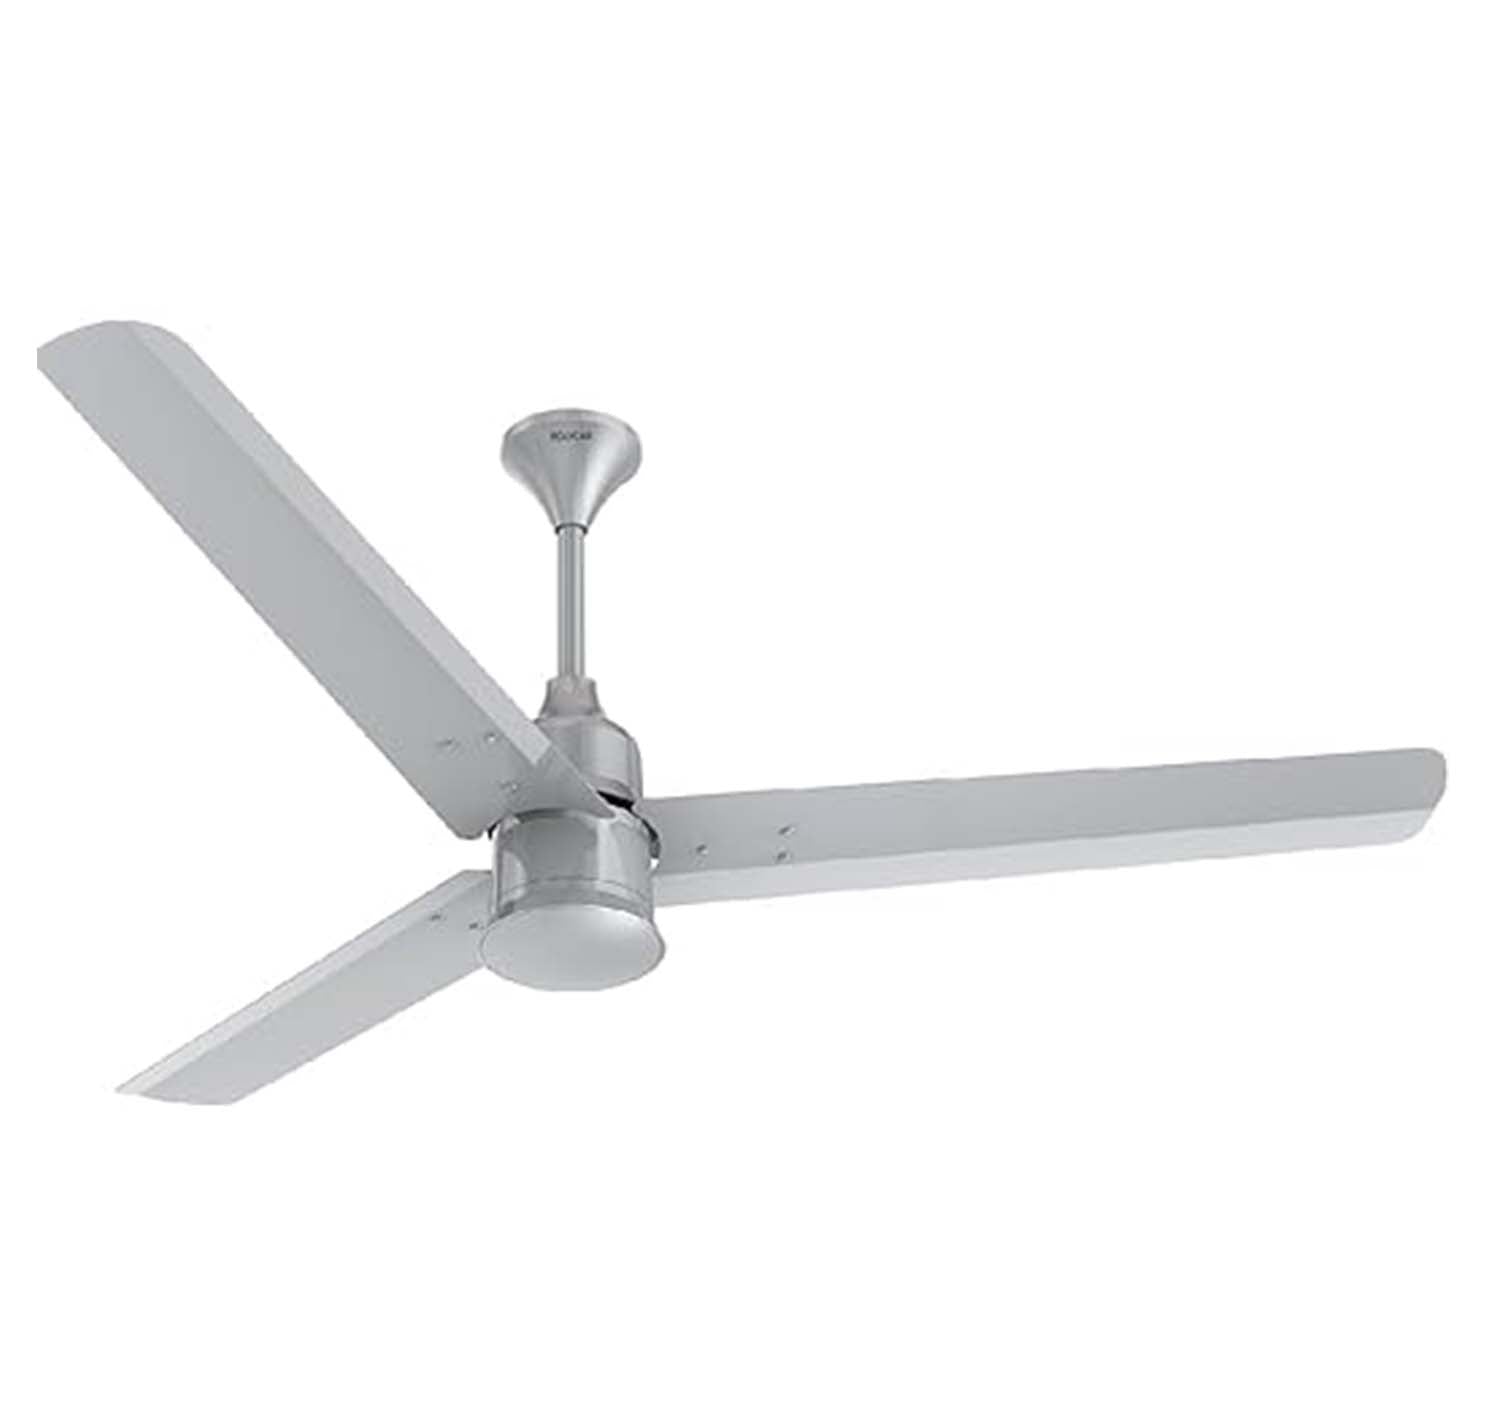 Polycab Silenco Advance BLDC Mini Ceiling Fan With 5 Star Rated - 1200mm - Cool Grey